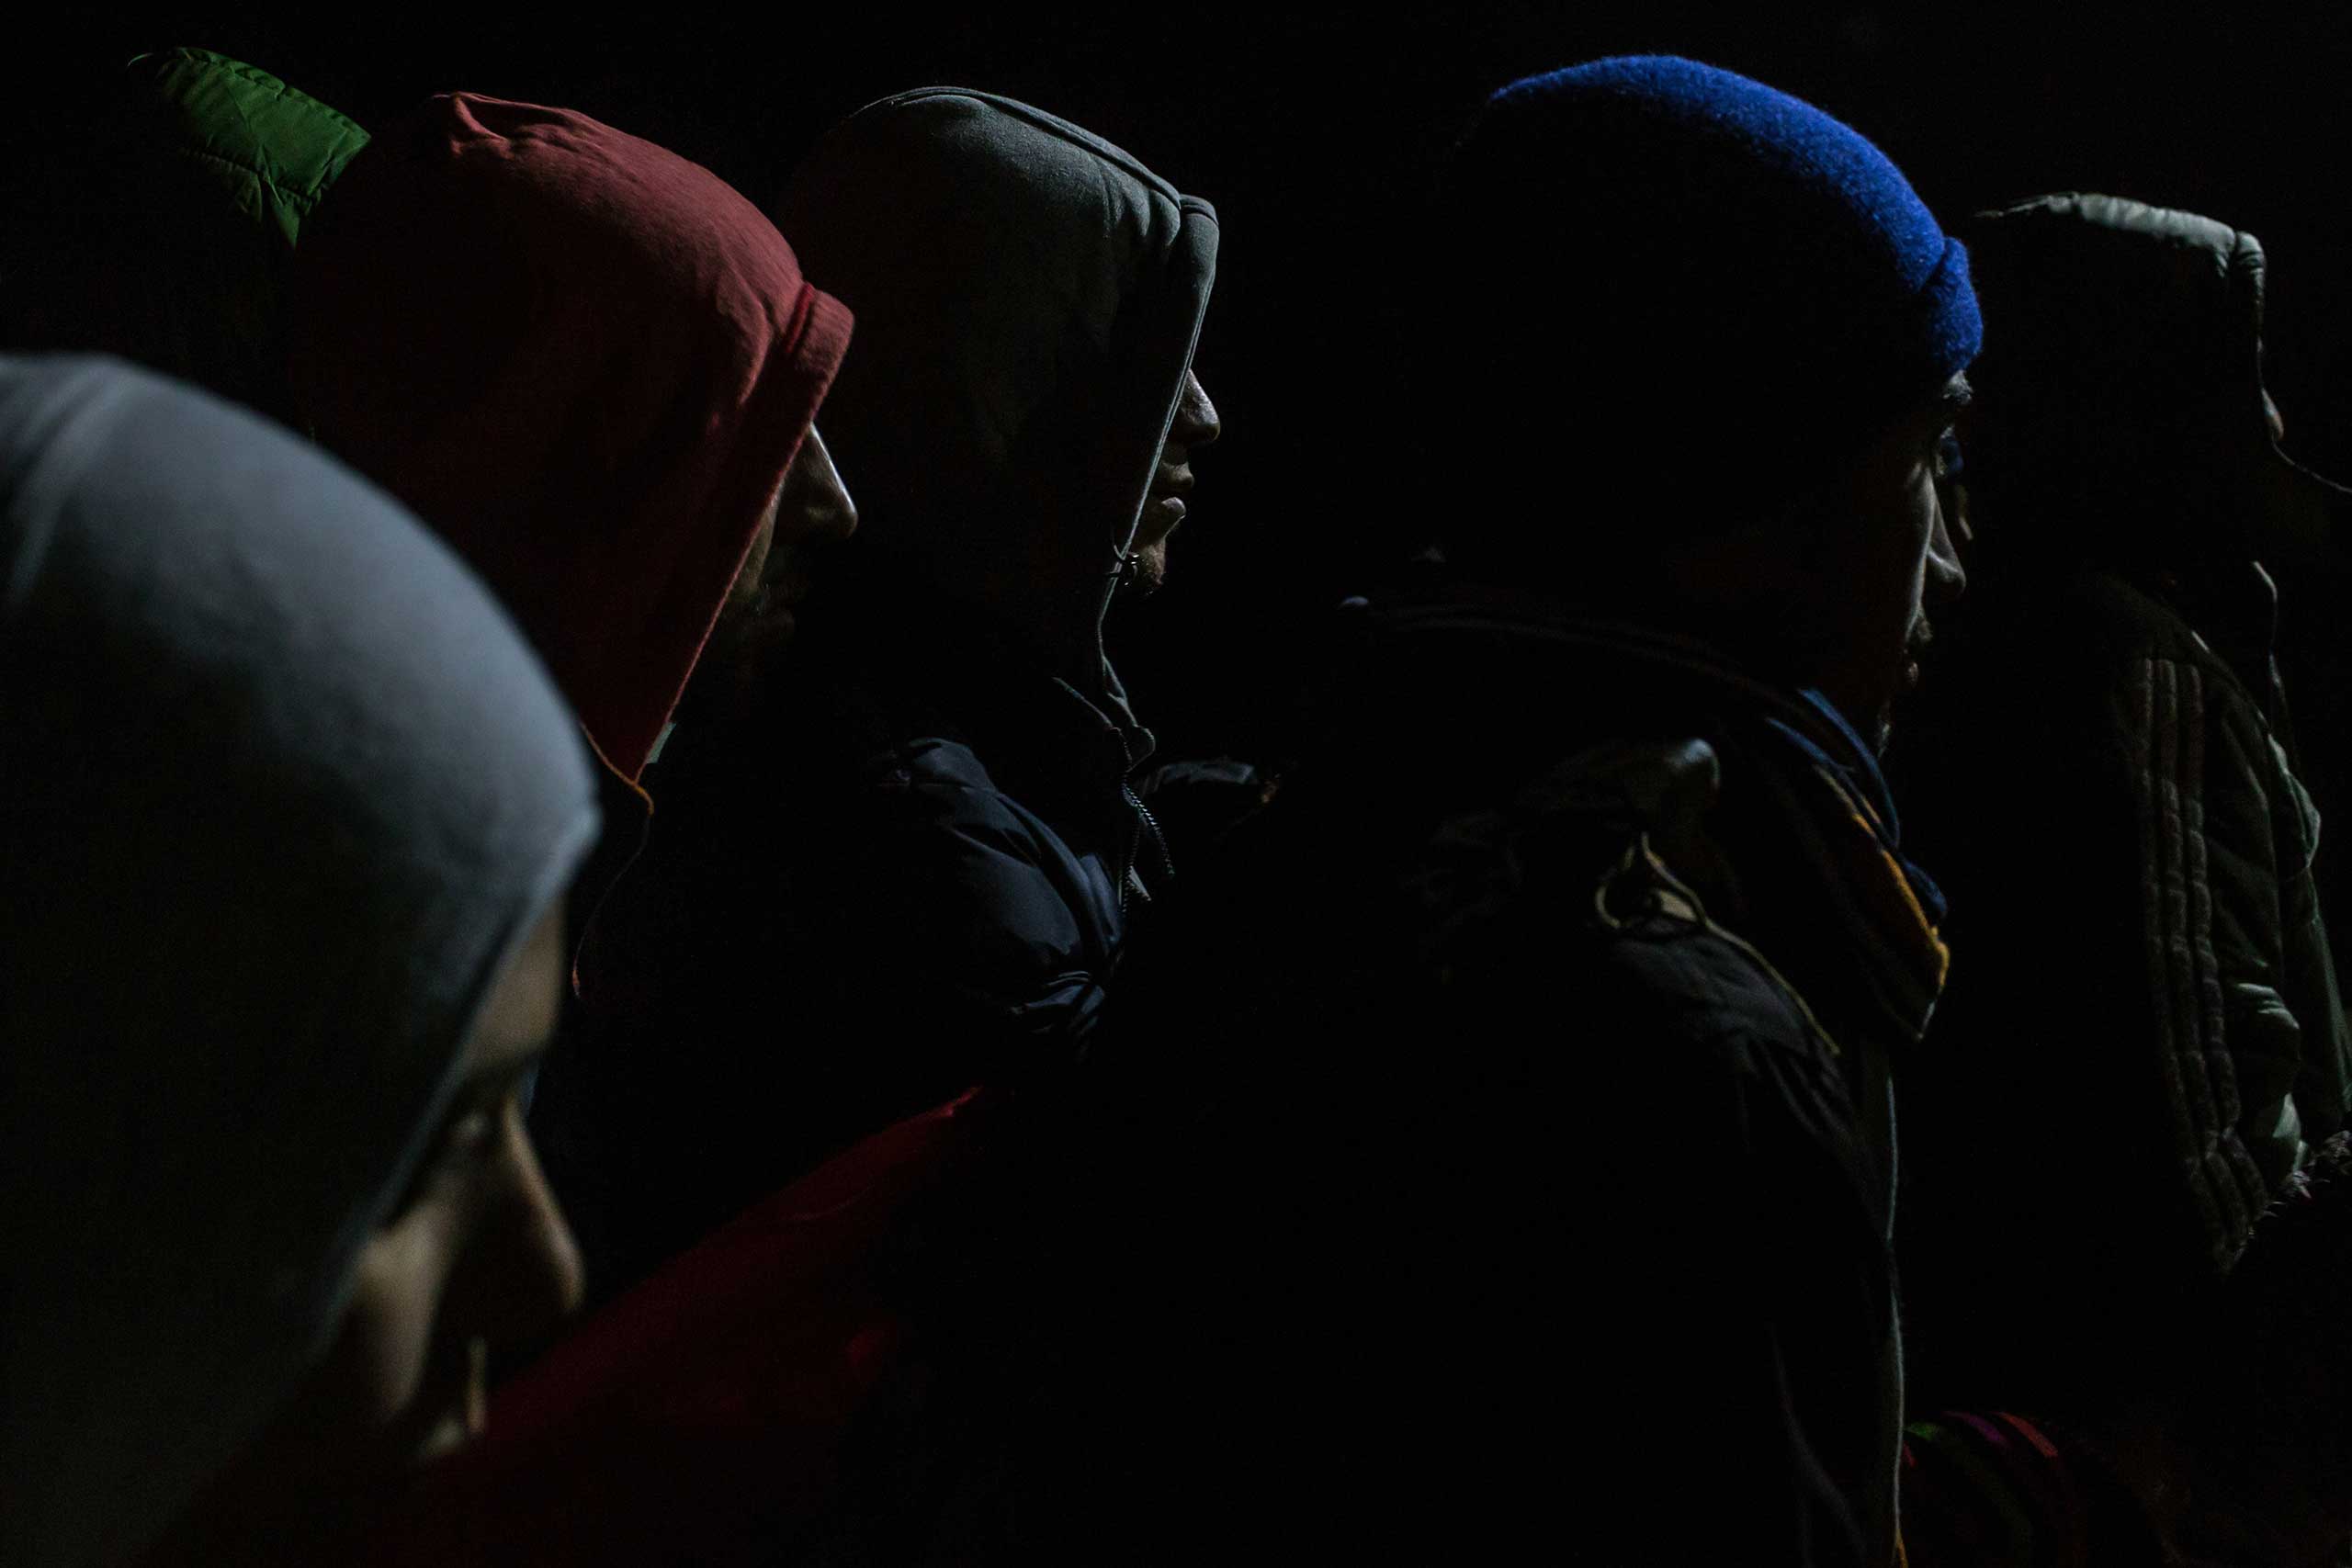 Refugees line up to be registered in a reception camp, in Gevgelija, Macedonia, so they can take a train to Belgrade, Serbia, and continue their journey through the Balkans toward Europe. Nov. 21, 2015.